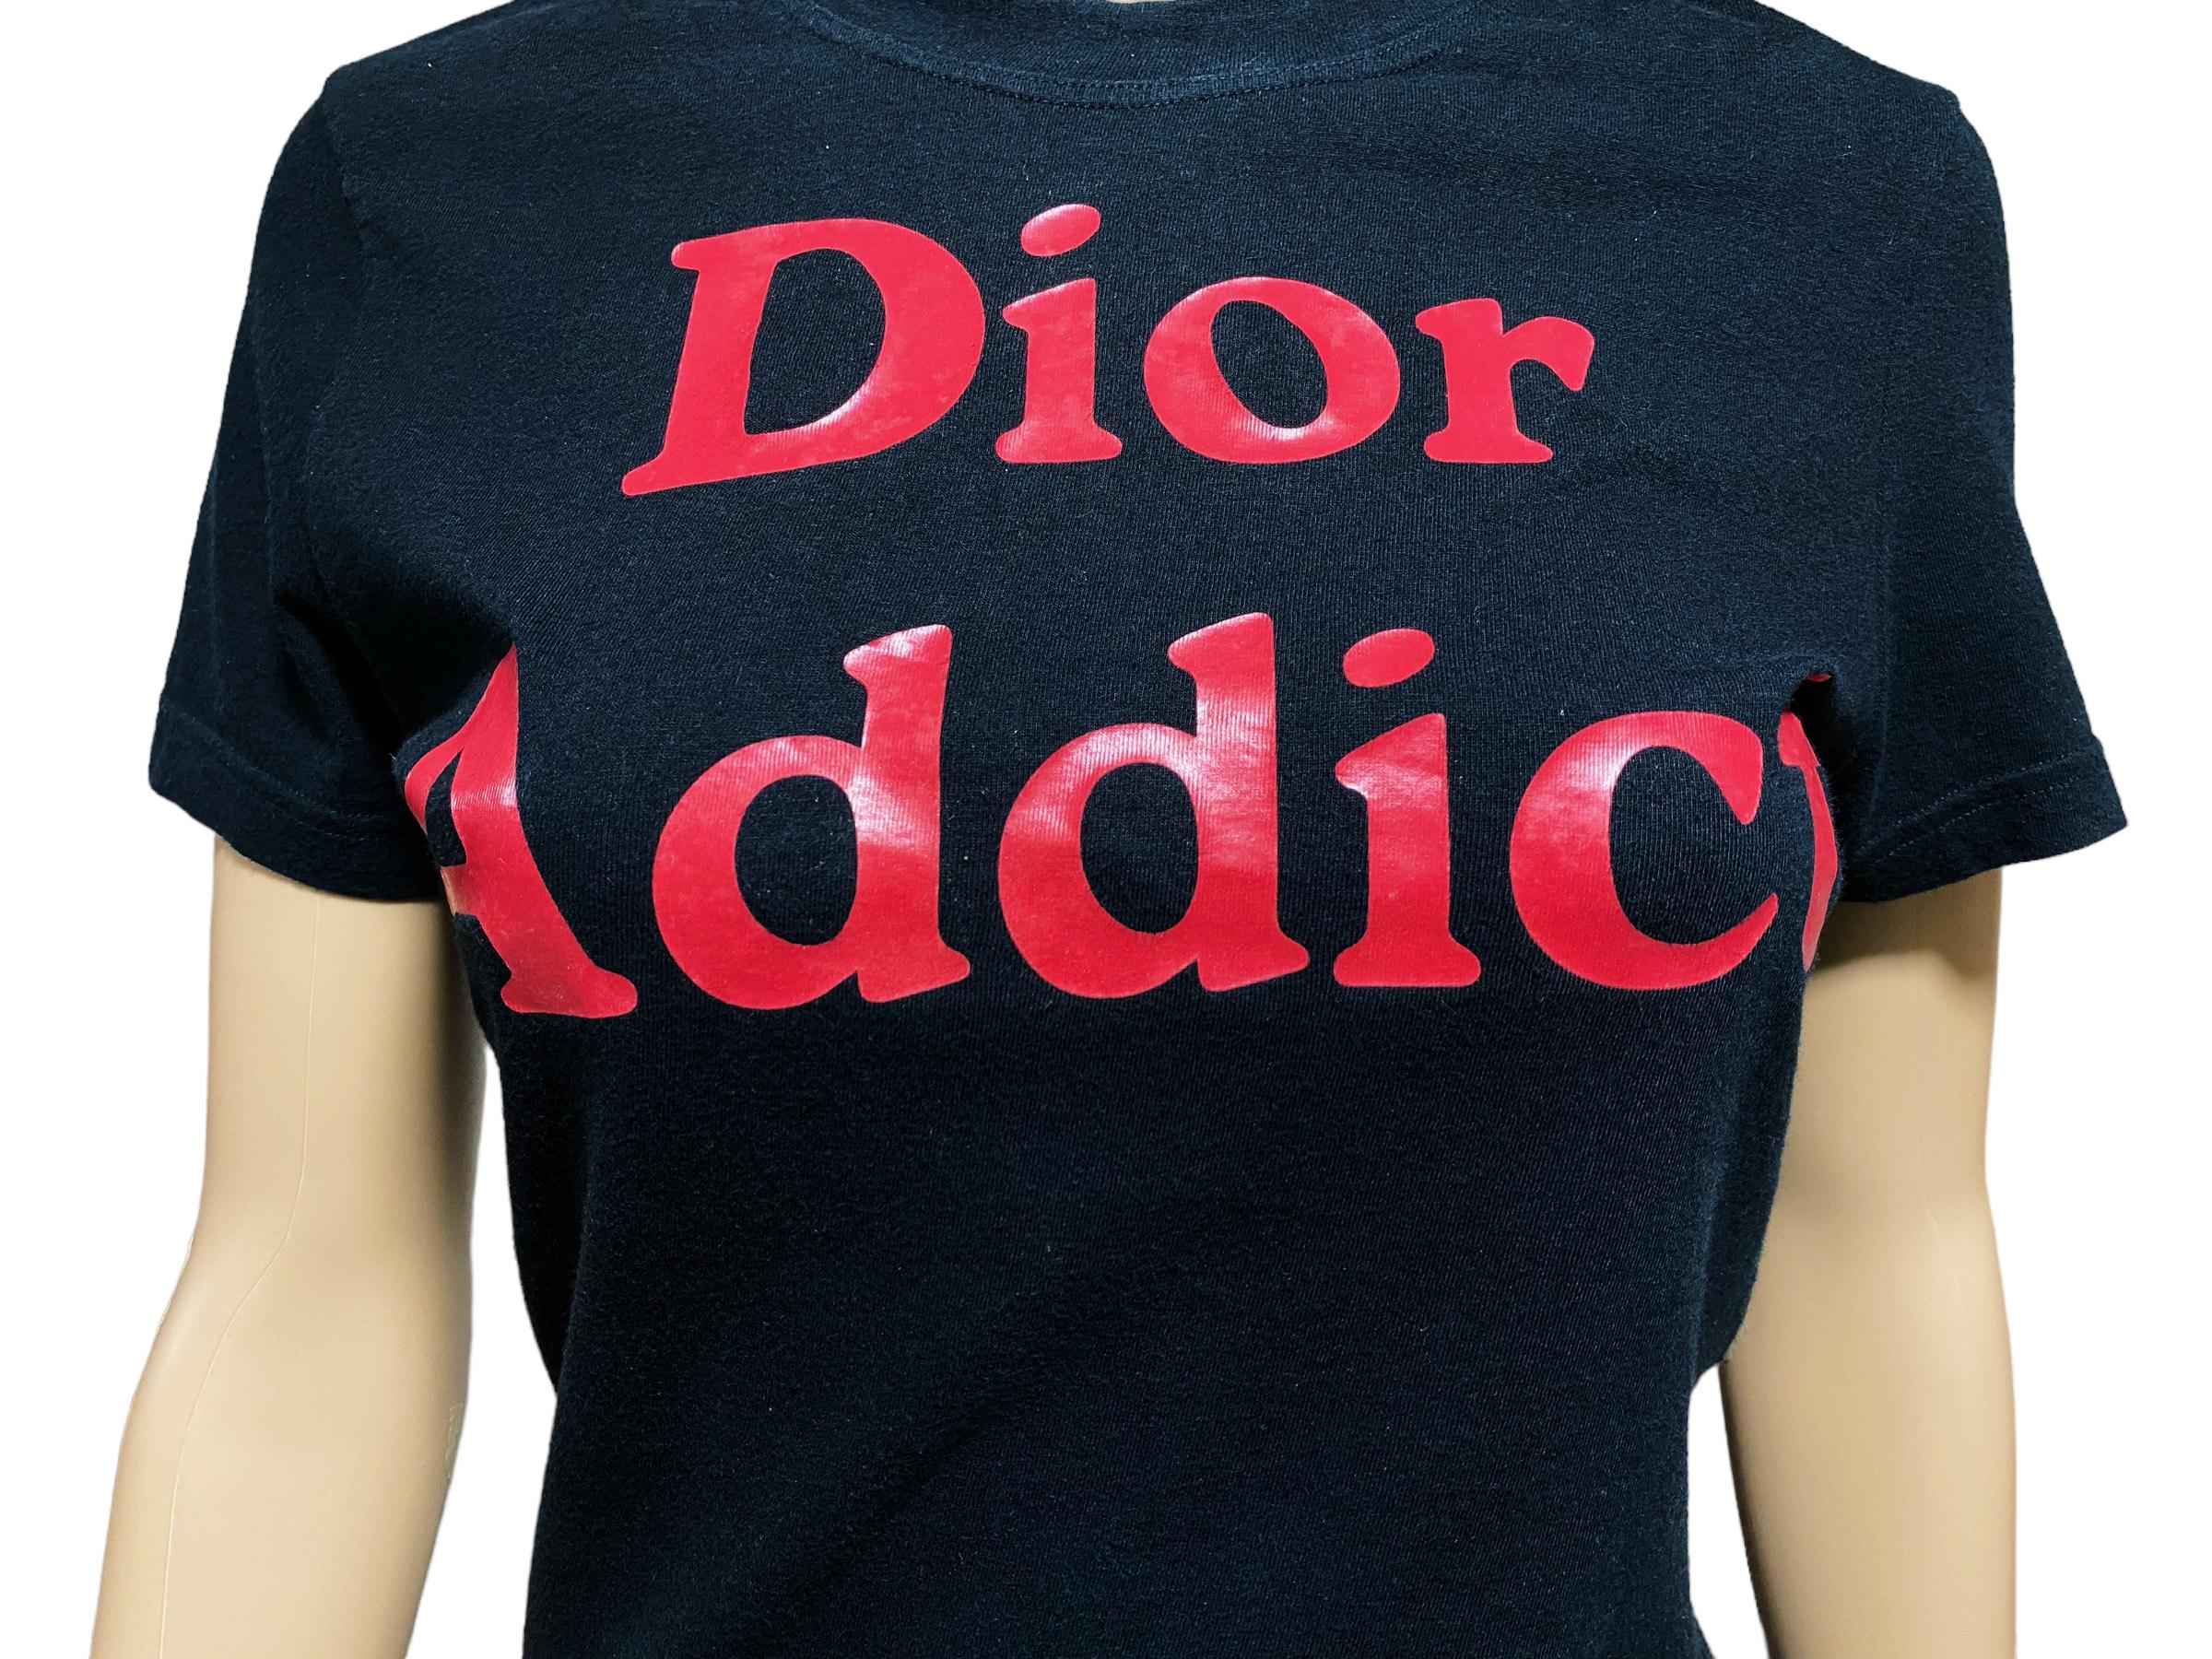 Rare Christian Dior - Dior Addict T-Shirt - Black and red crew neck top adorned with a Dior Addict print designed by John Galliano for Christian Dior.  As seen on Kendall Jenner.

Designer: John Galliano for Christian Dior
Dimensions (Inches) (Taken